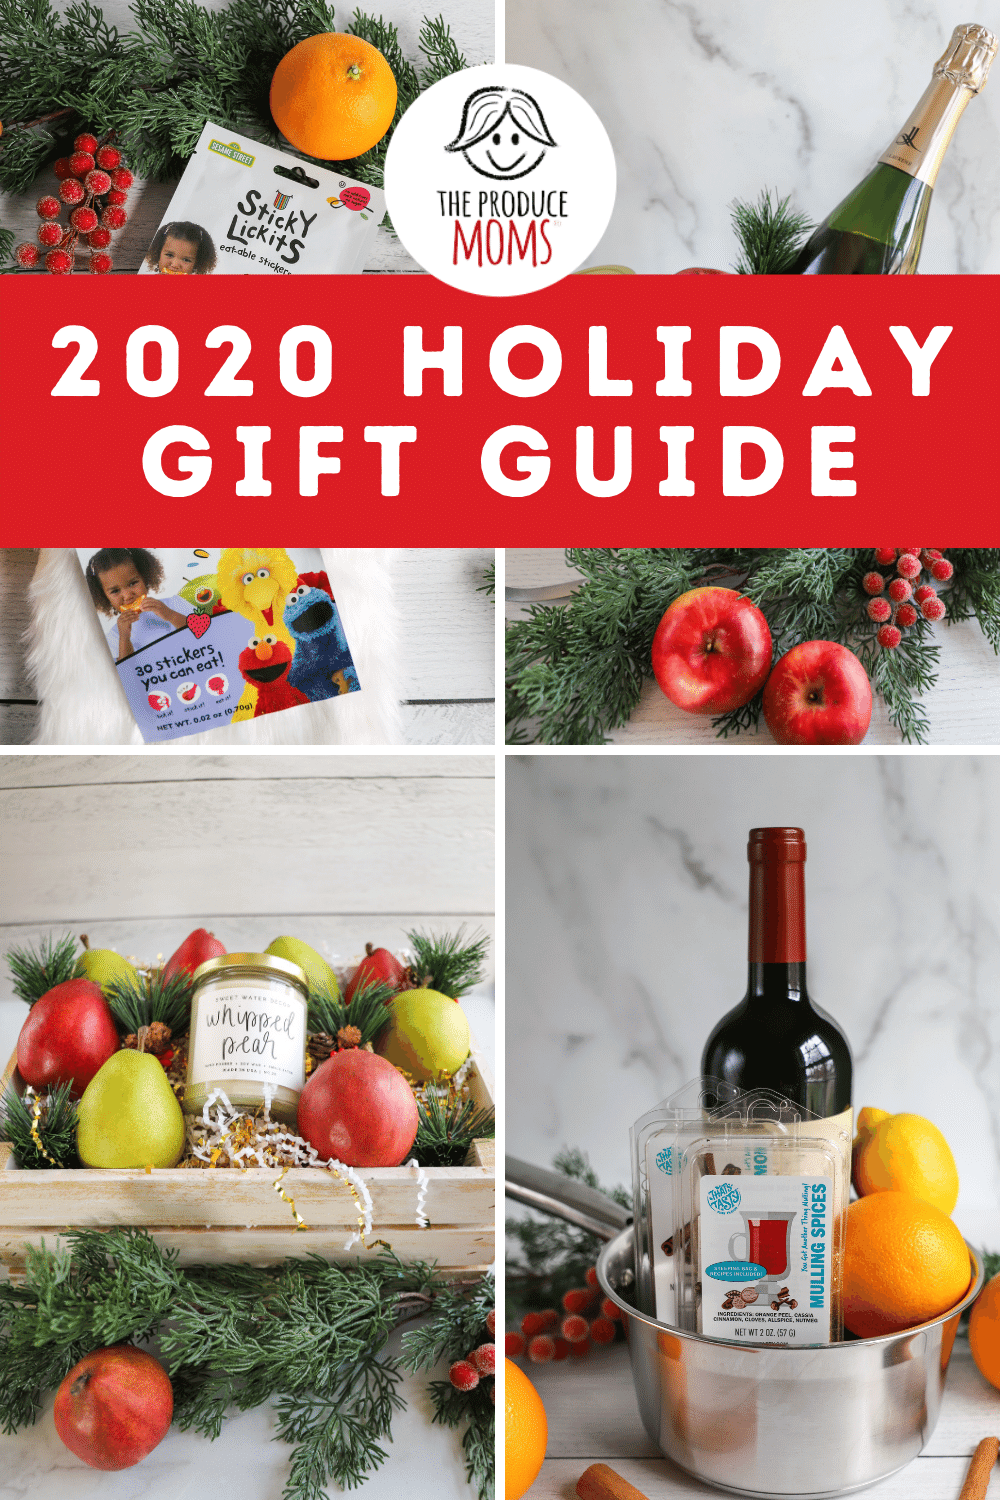 The Produce Moms' 2020 Holiday Gift Guide